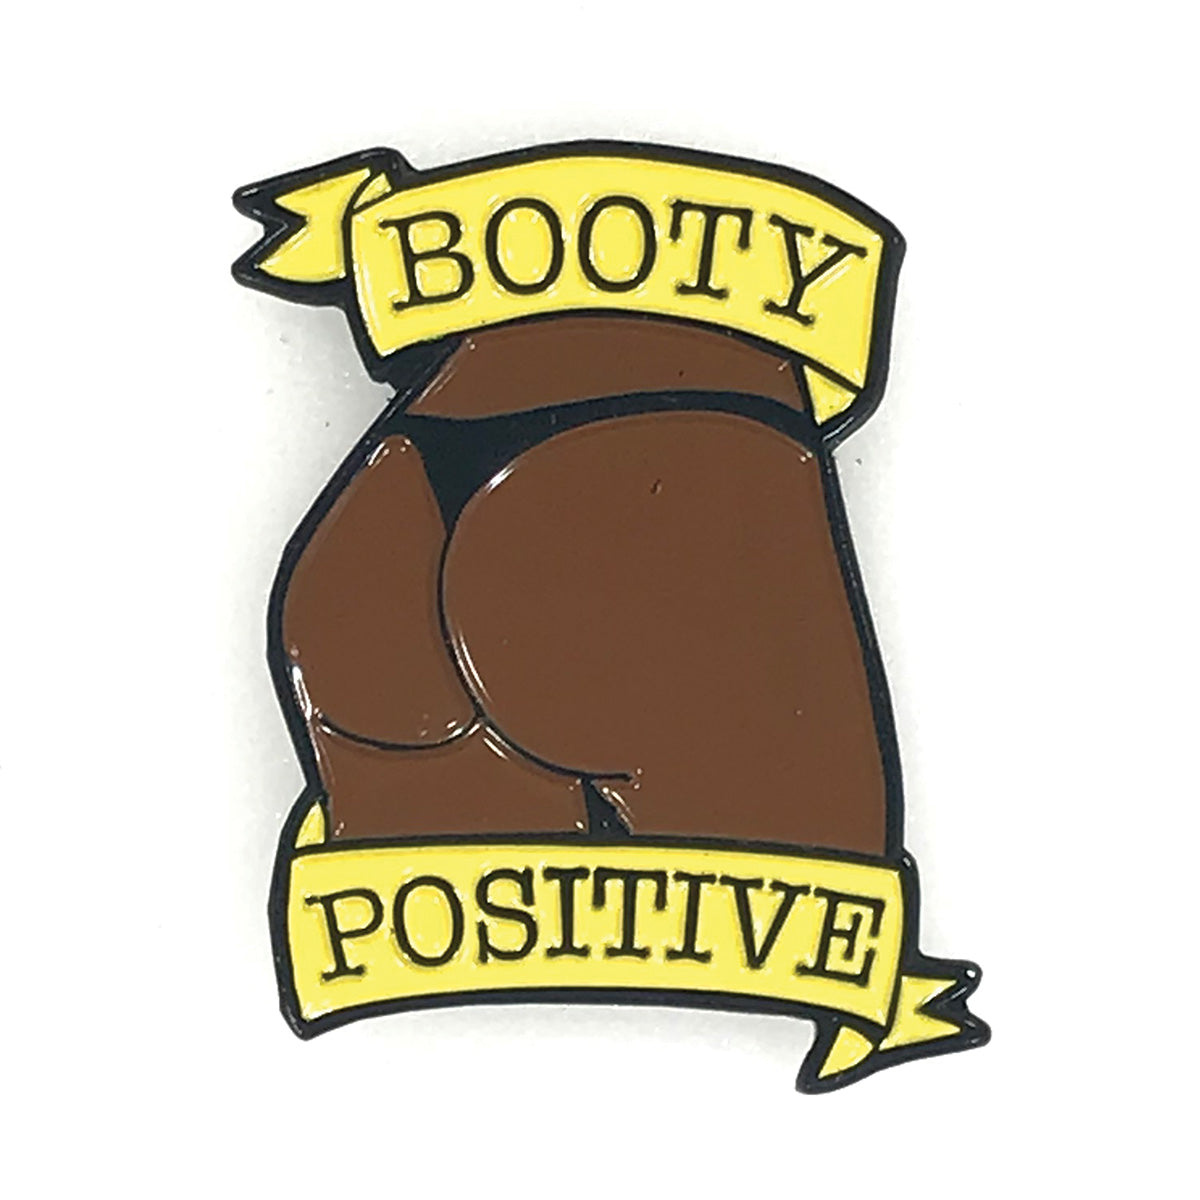 Geeky & Kinky Booty Positive Pin - Assorted Colors